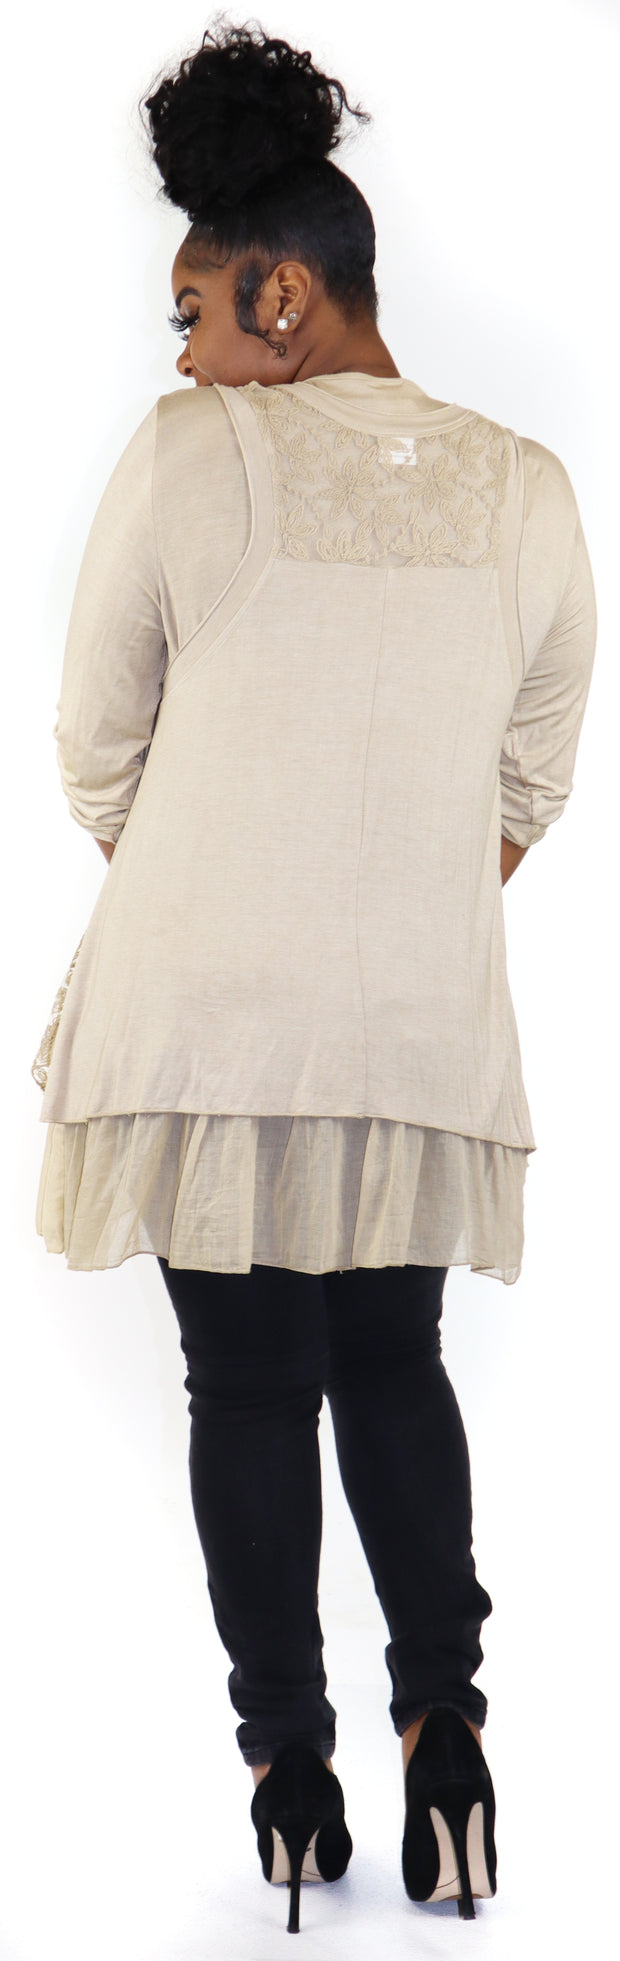 Women Plus Size Tunic top, 2 pc. Embroidered Lace Tunic, Women lace Blouse, Tunic and inner .